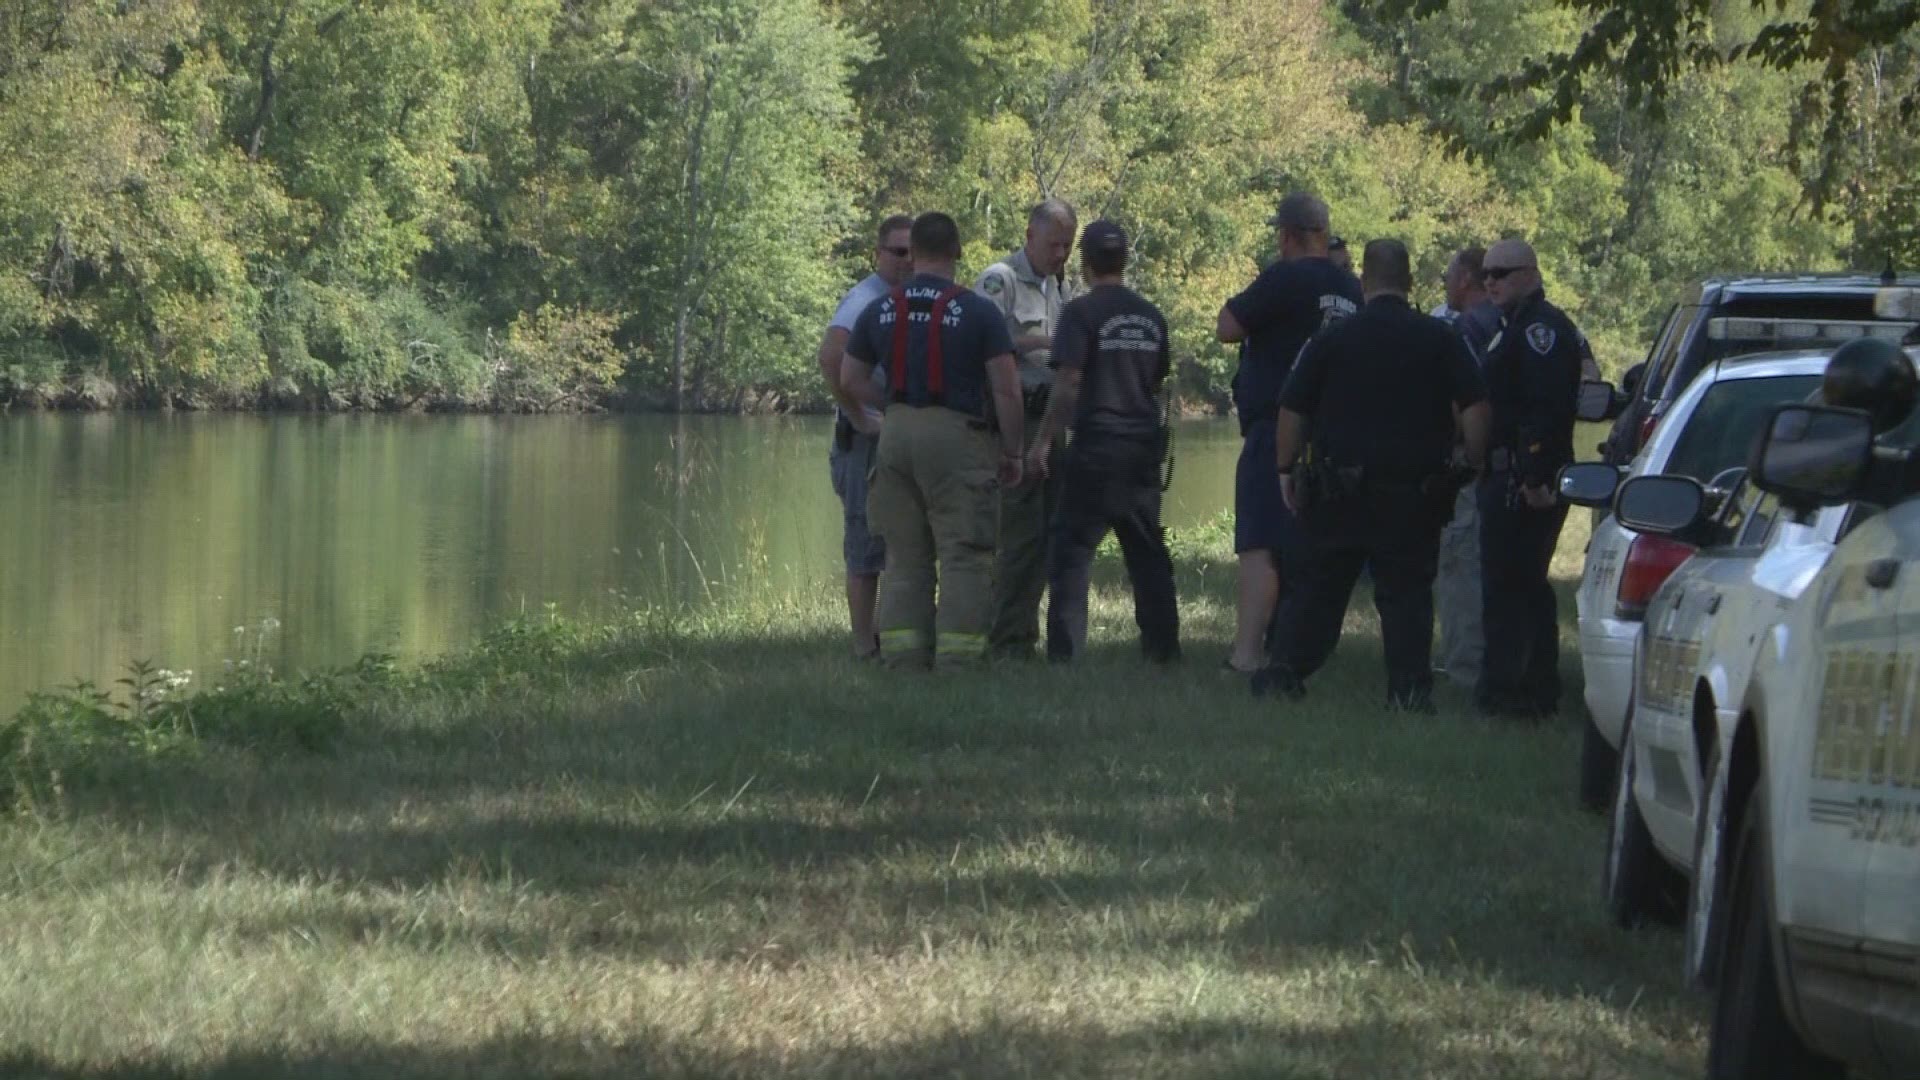 Two people were hurt when their plane clipped a power line and crashed into the French Broad River.